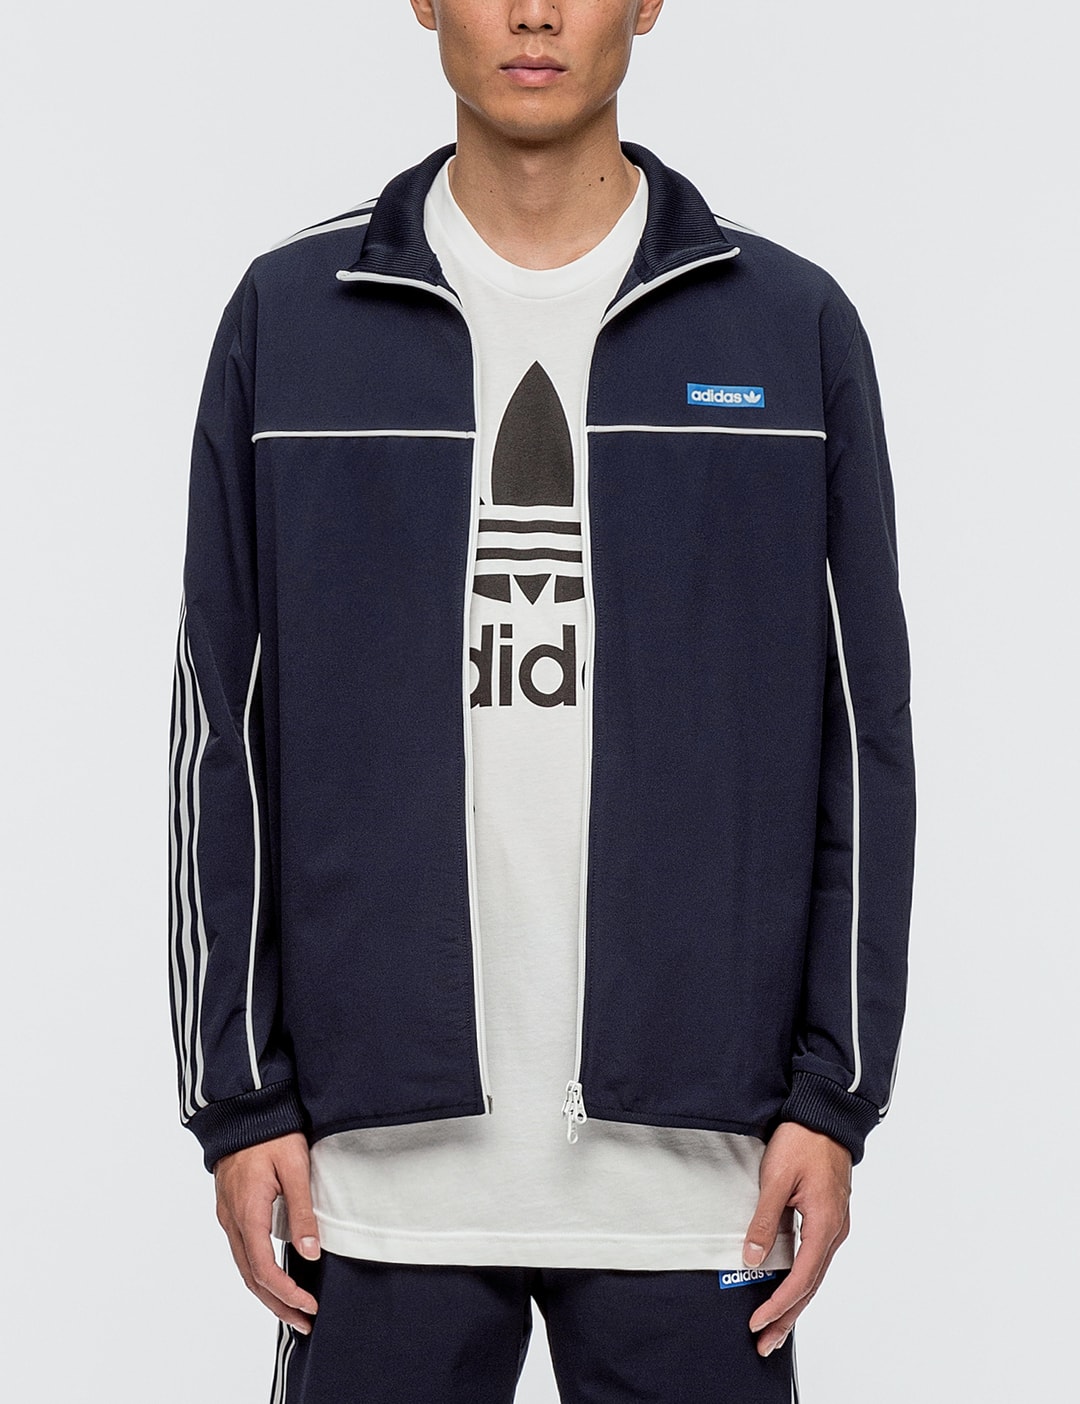 Adidas Originals - Tennoji Track Jacket | HBX - Globally Curated and Lifestyle by Hypebeast